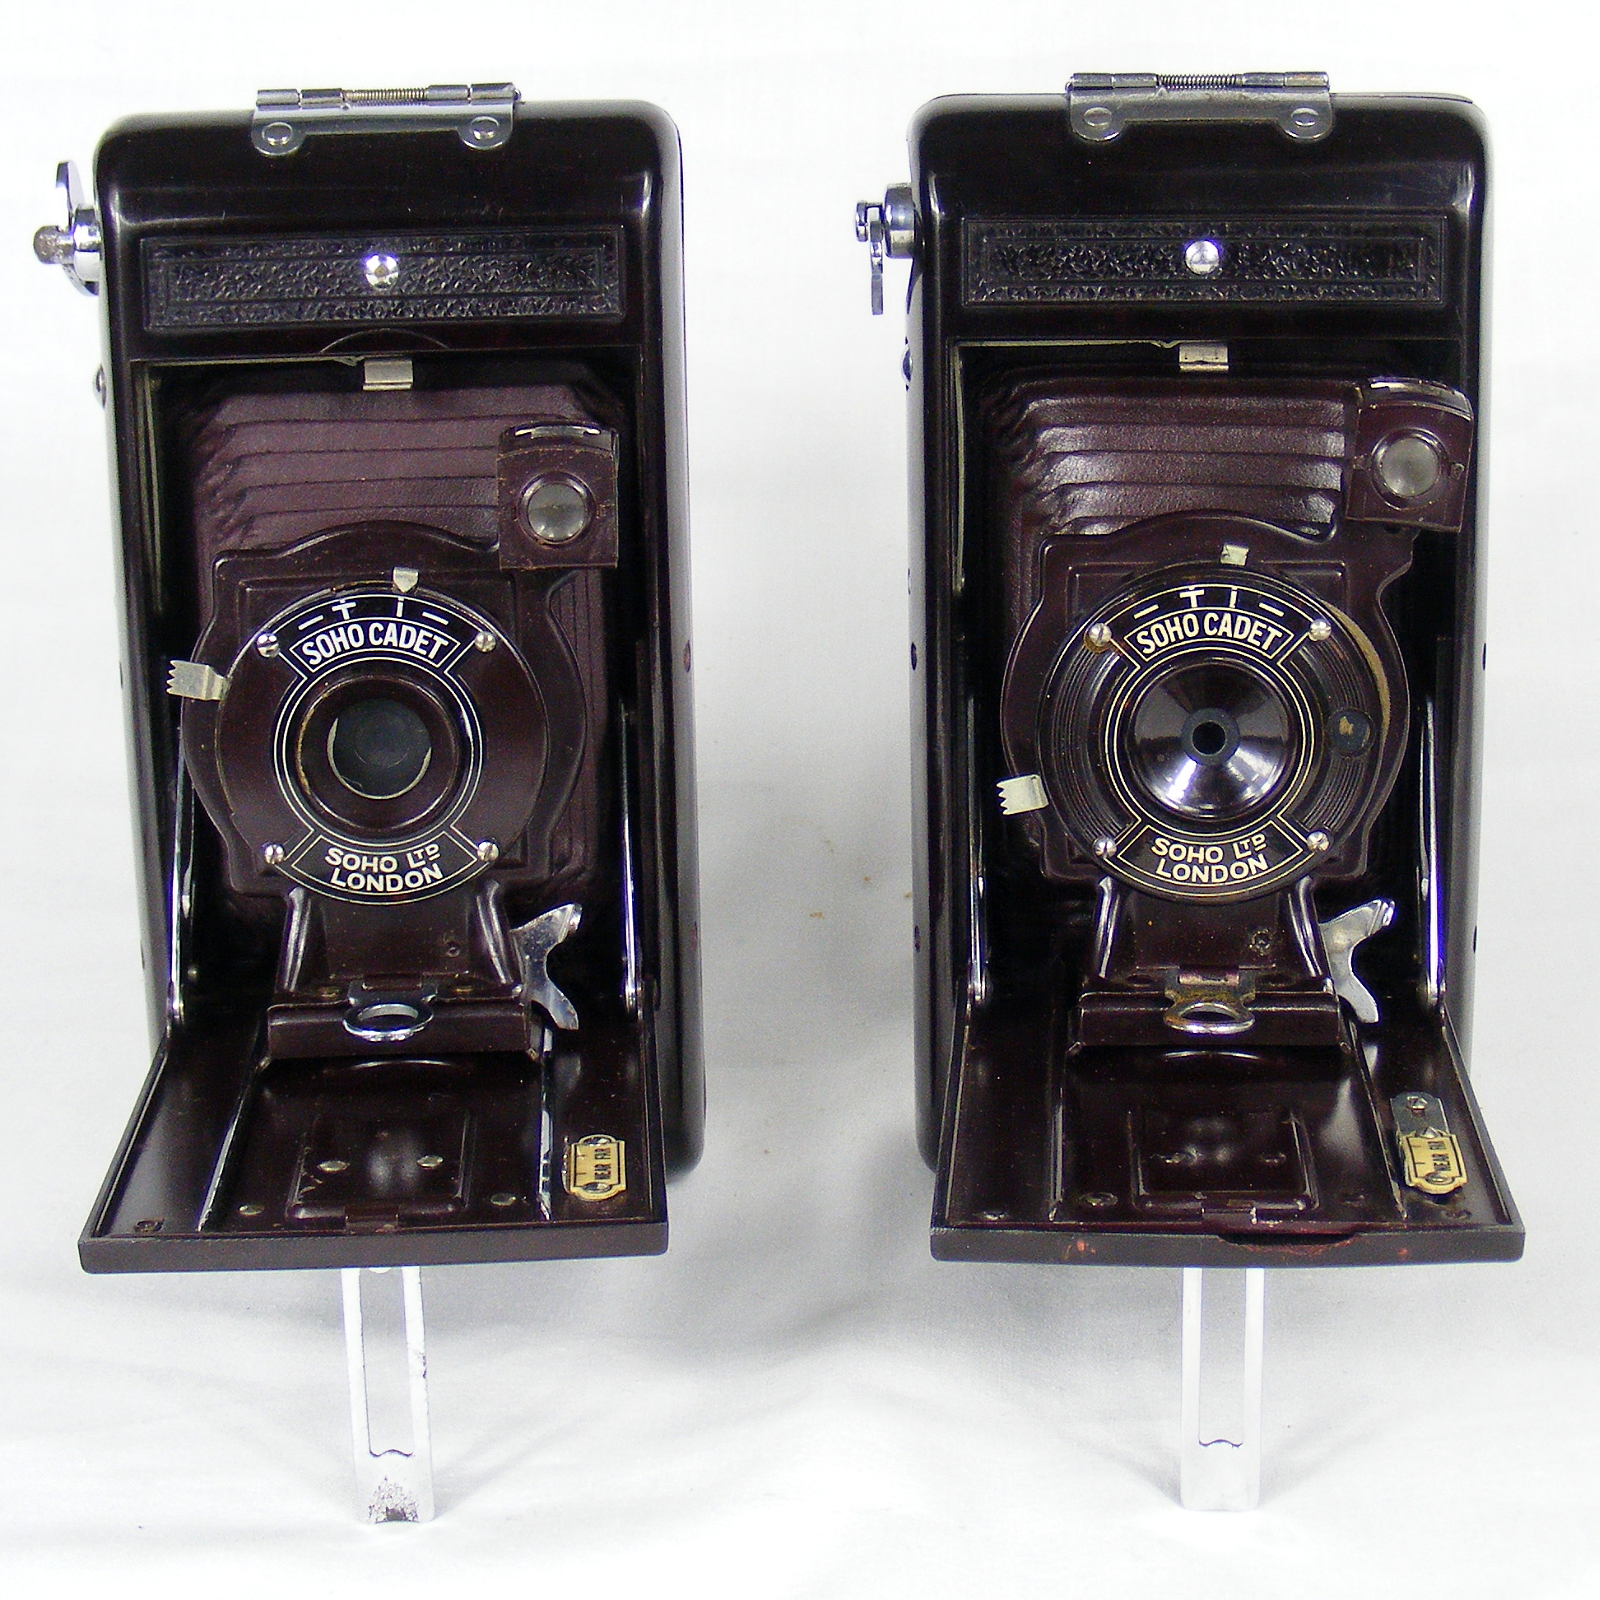 Image of basic Soho Cadet models side by side (front view)